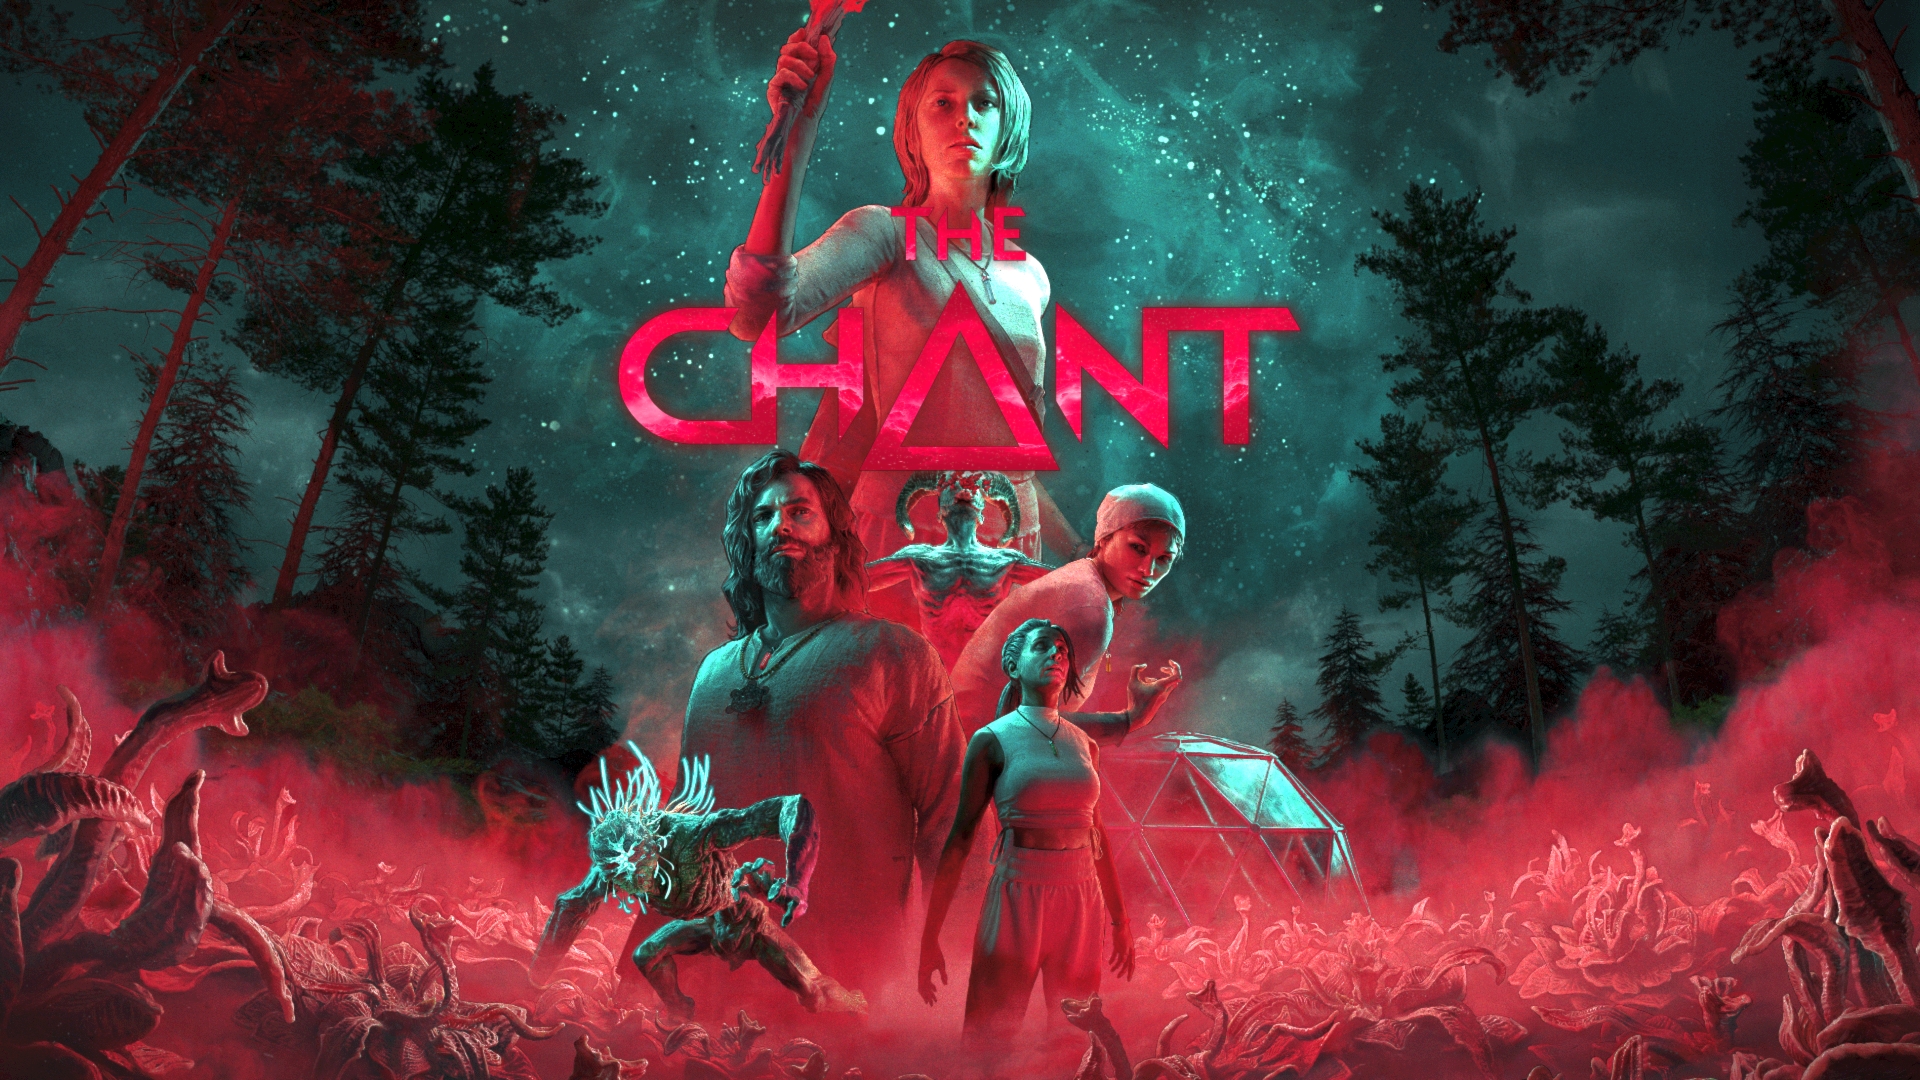 The Chant PS5 Review #1